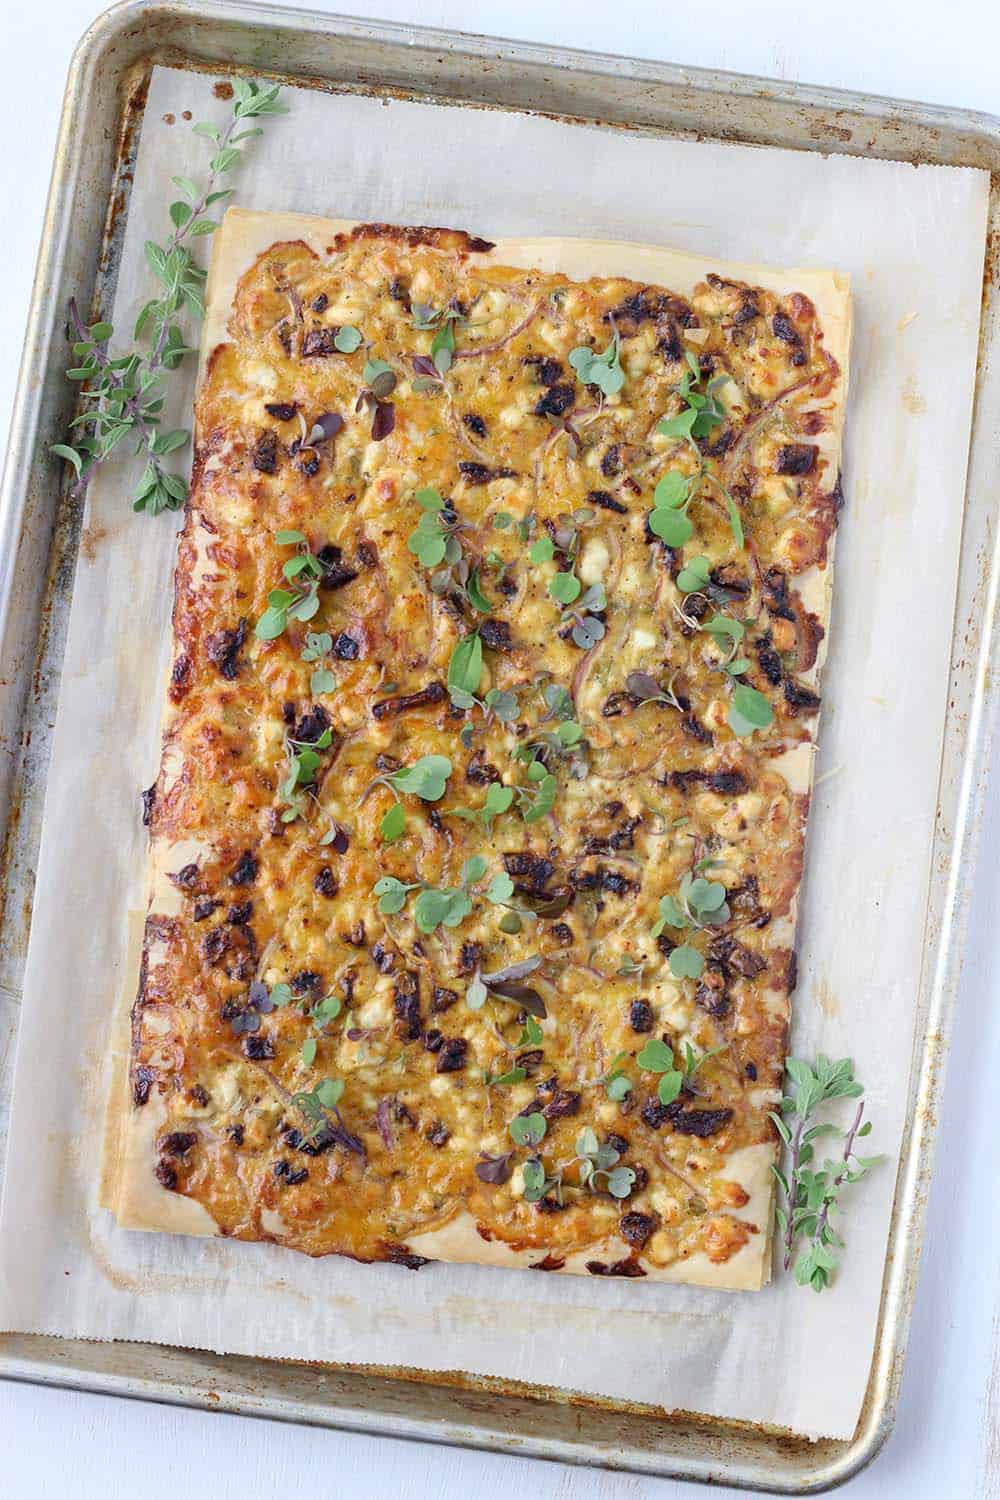 This Feta and Sun Dried Tomato Tart recipe is the perfect vegetarian appetizer or light meal. It's easy to make using filo (phyllo) dough, or even puff pastry. 